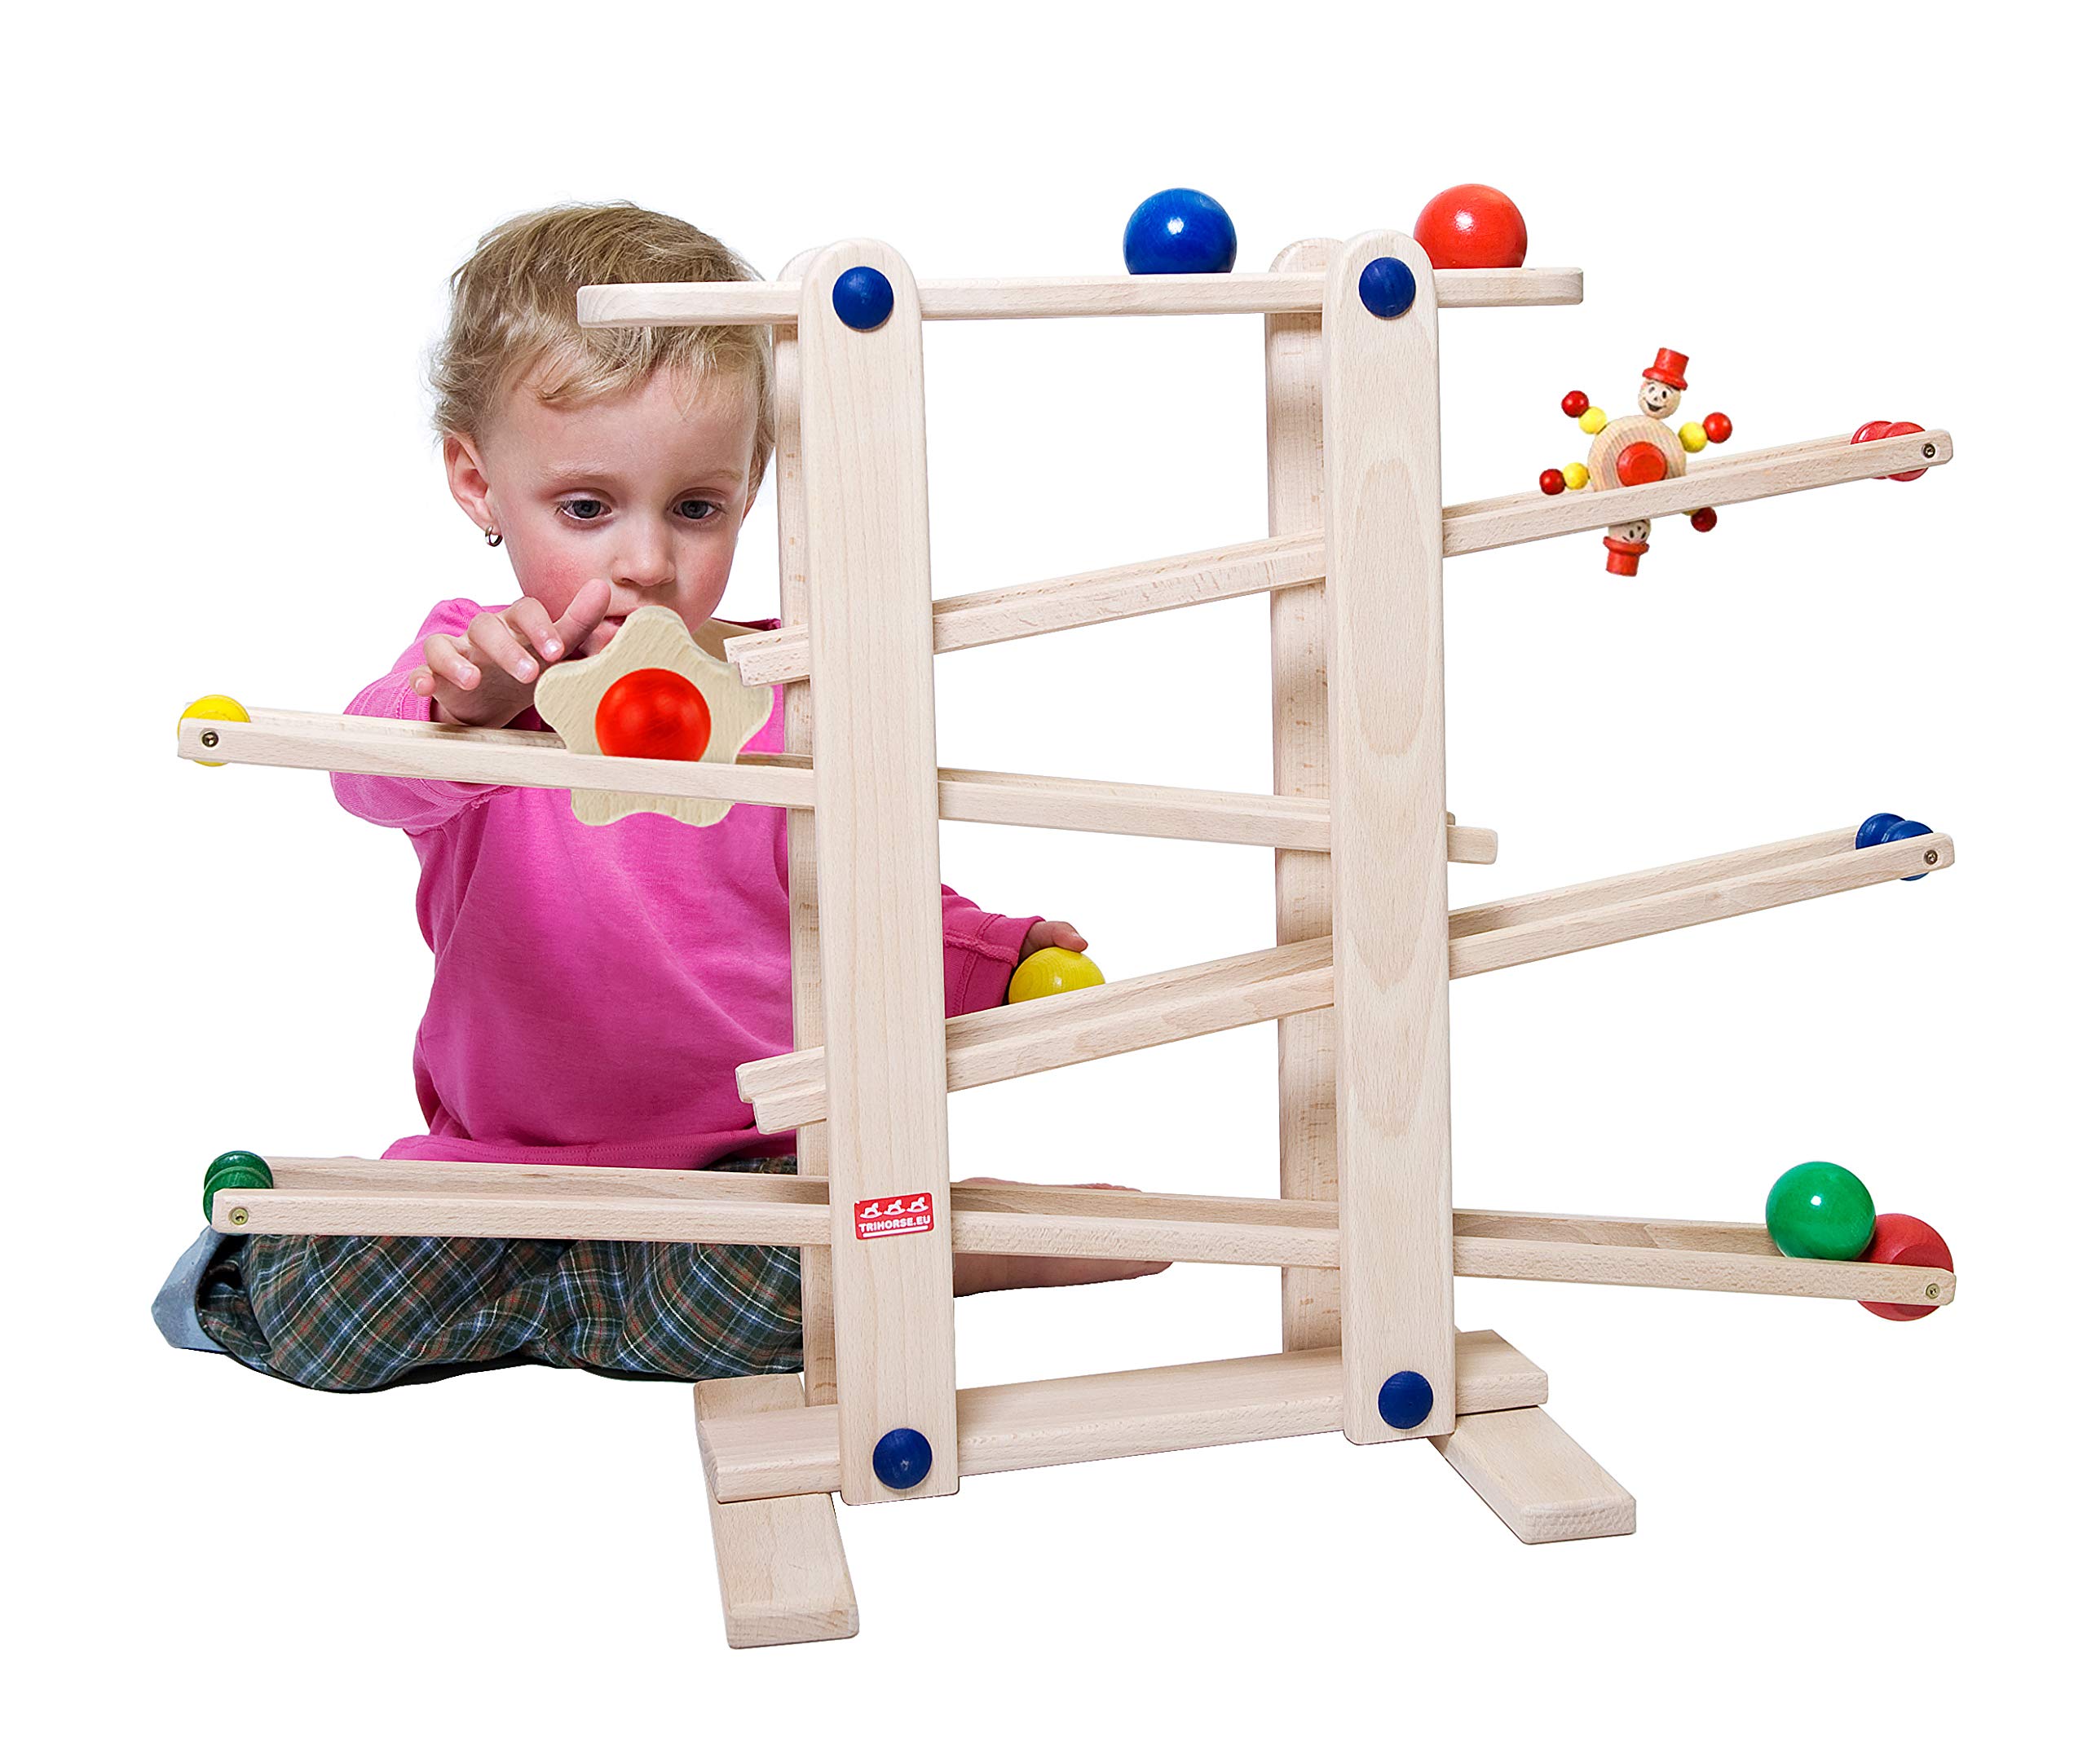 Trihorse Wooden Marble Run, 19 Inches Tall - Sustainable Toys for Toddlers from 1 Year Old - 6 Ball Tracks Made of Premium Beech Wood. Made in EU